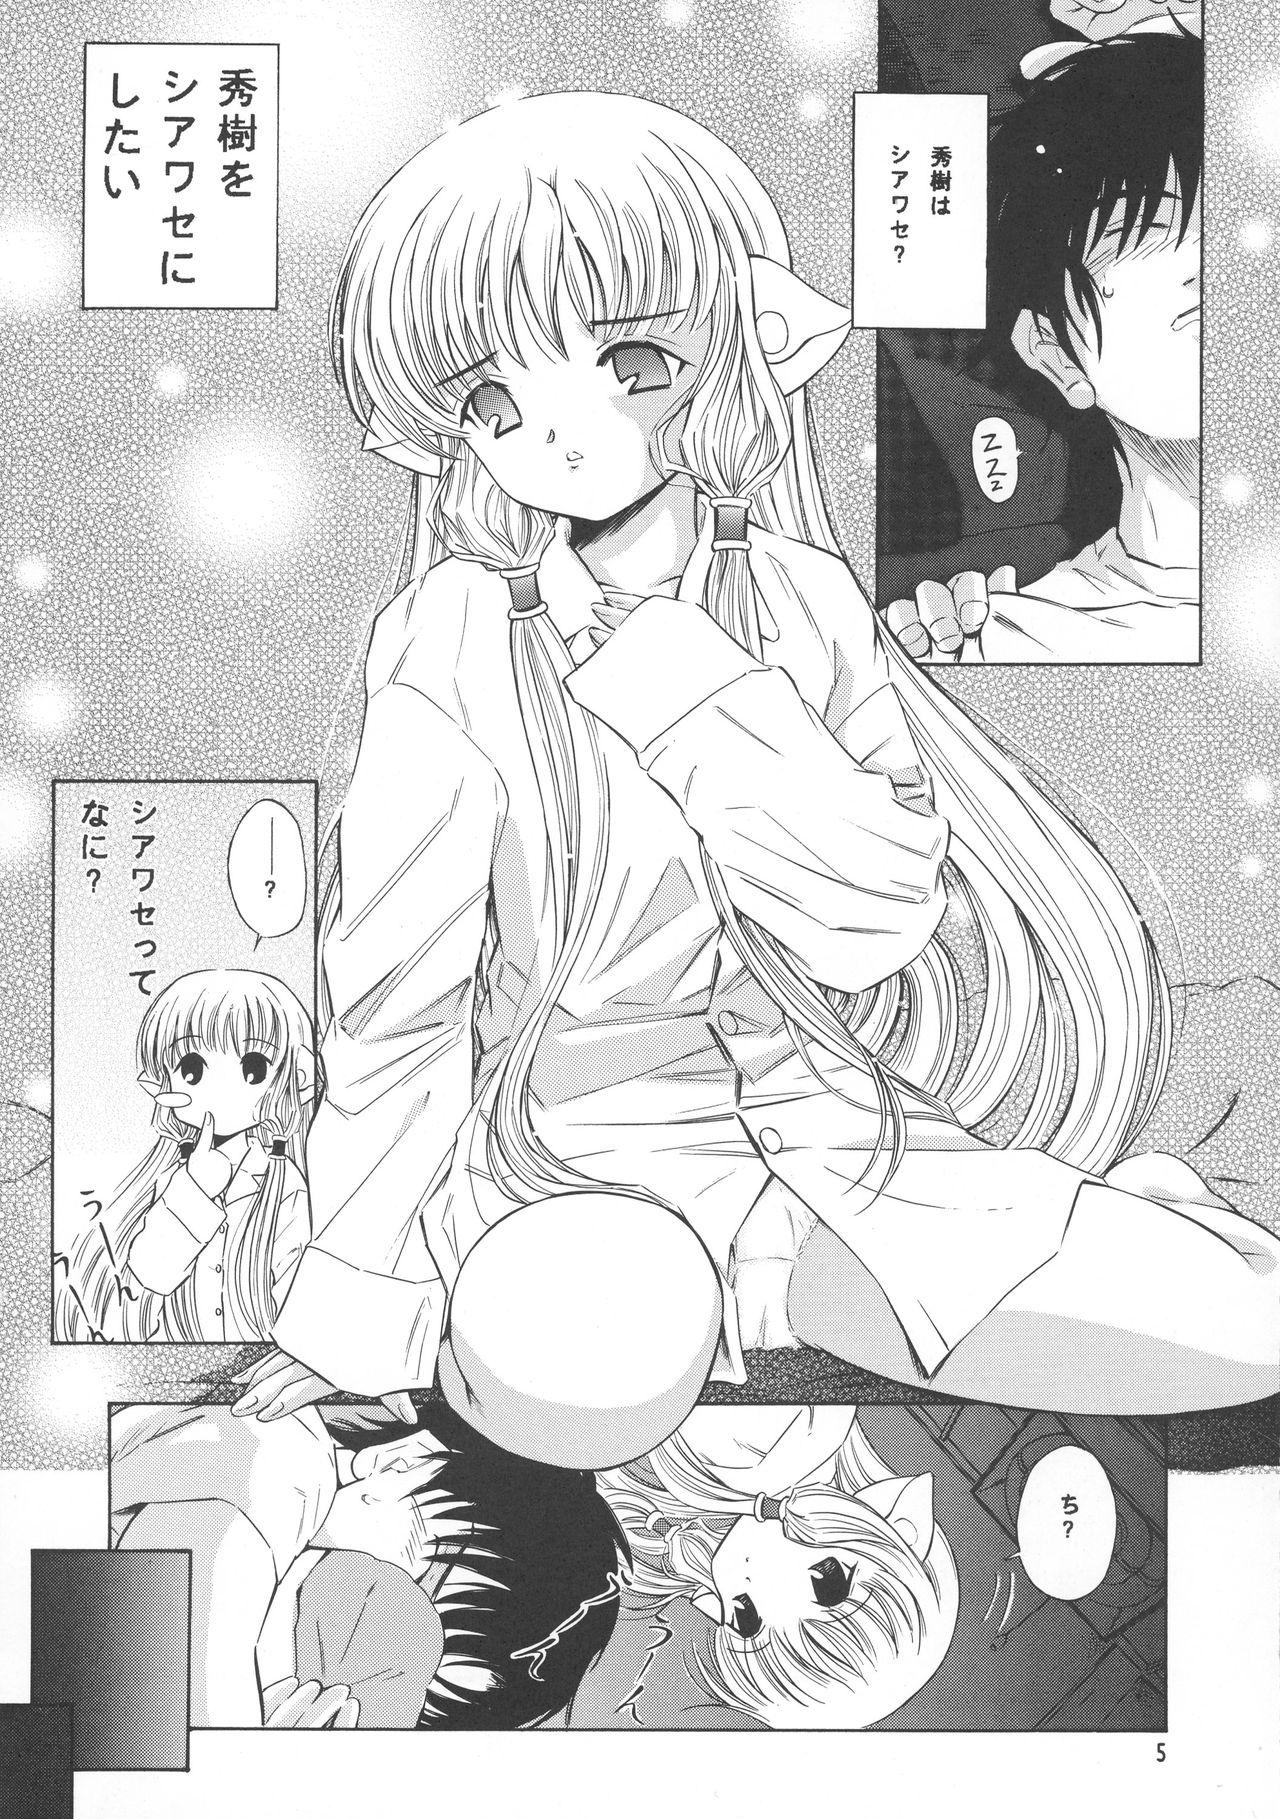 Show Tricolor - Cardcaptor sakura Chobits Angelic layer Close Up - Page 5